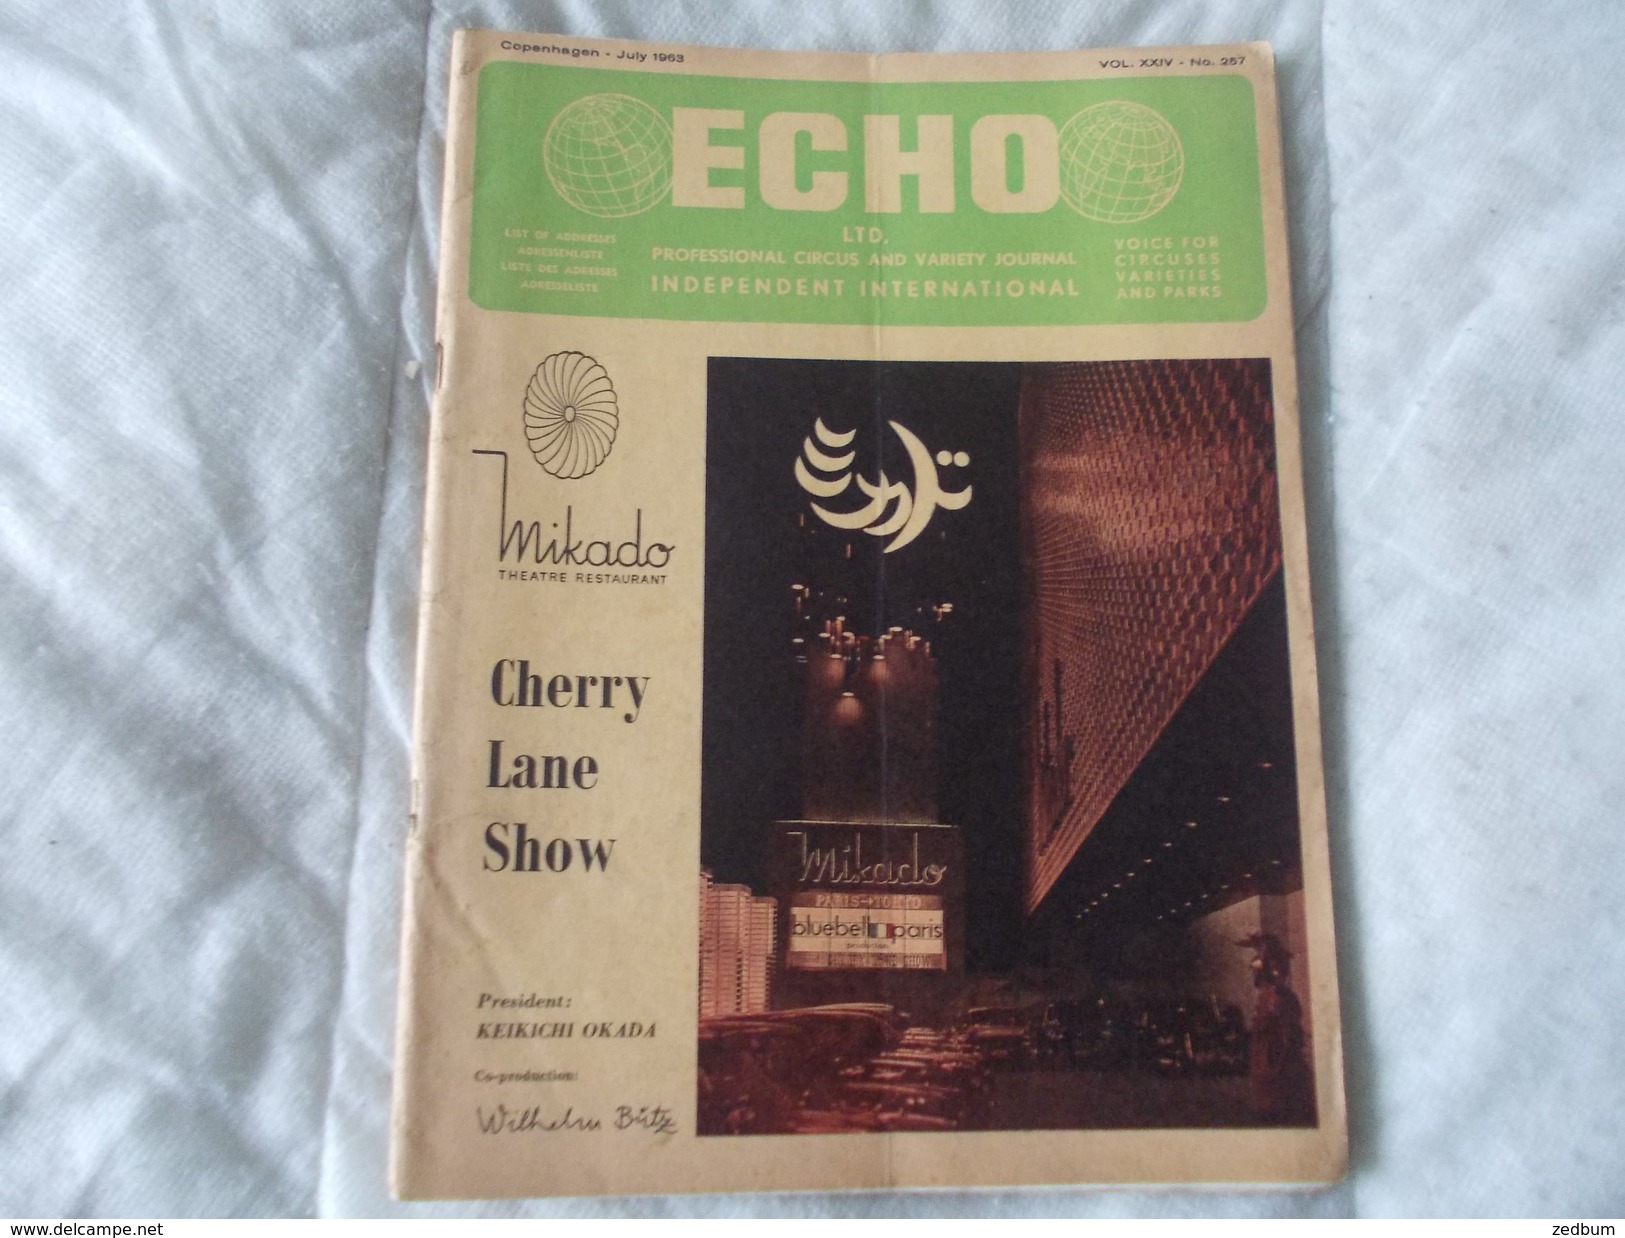 ECHO LTD Professional Circus And Variety Journal Independent International N° 257 July 1963 - Entertainment